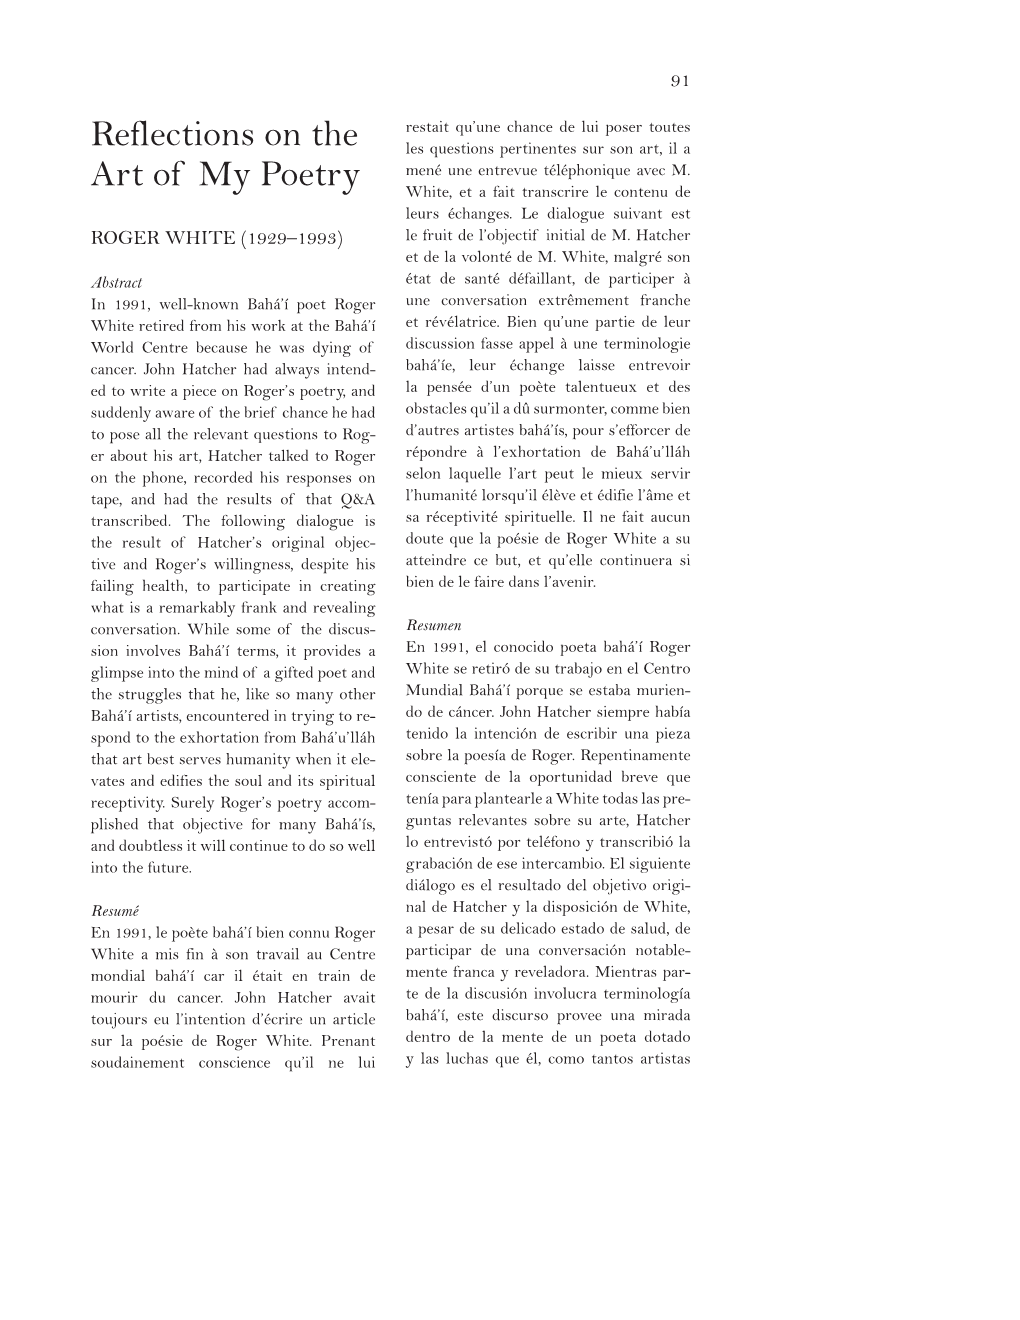 Reflections on the Art of My Poetry 93